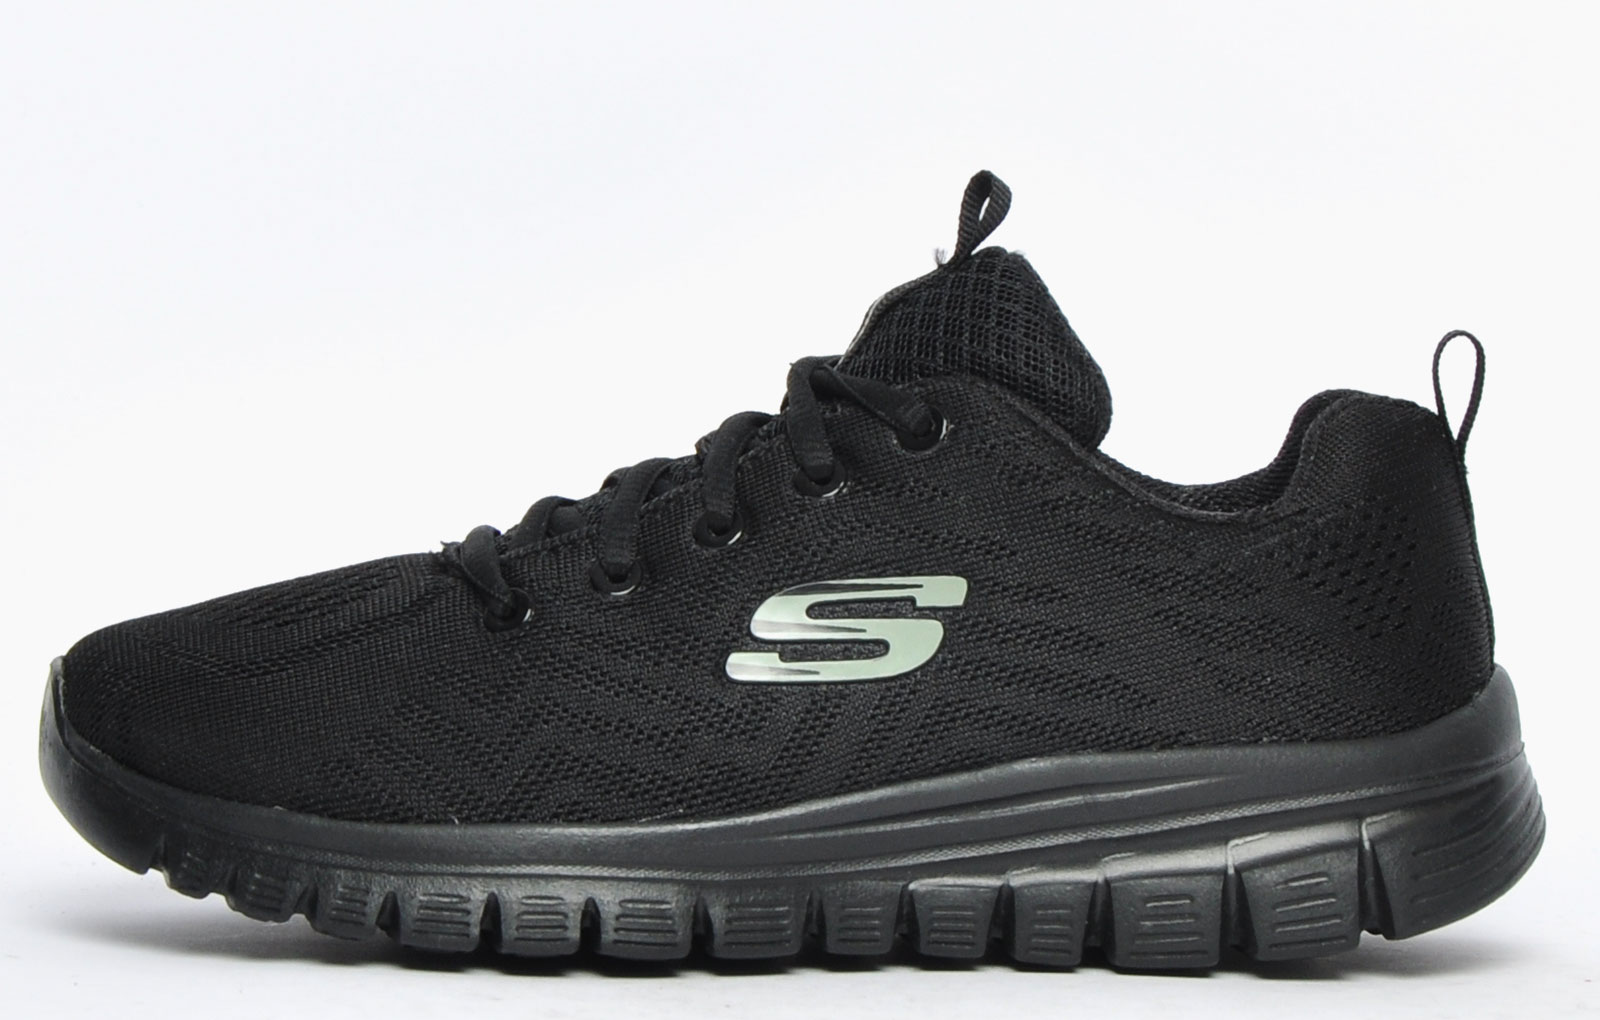 Cheap Skechers for Women UK – Free UK Delivery | Express